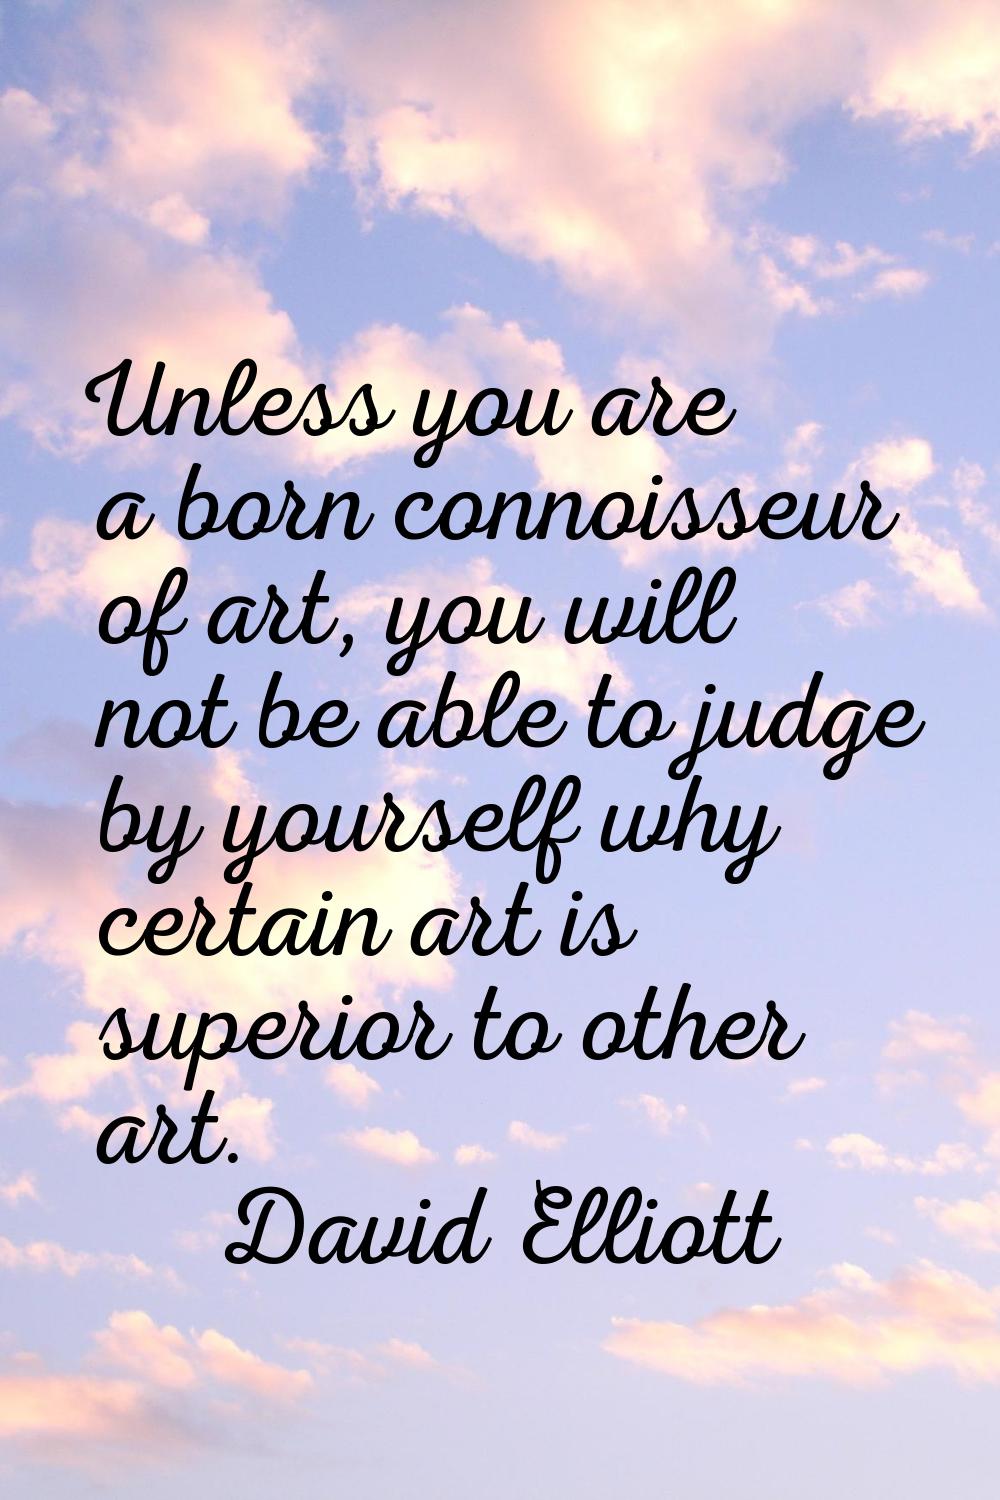 Unless you are a born connoisseur of art, you will not be able to judge by yourself why certain art